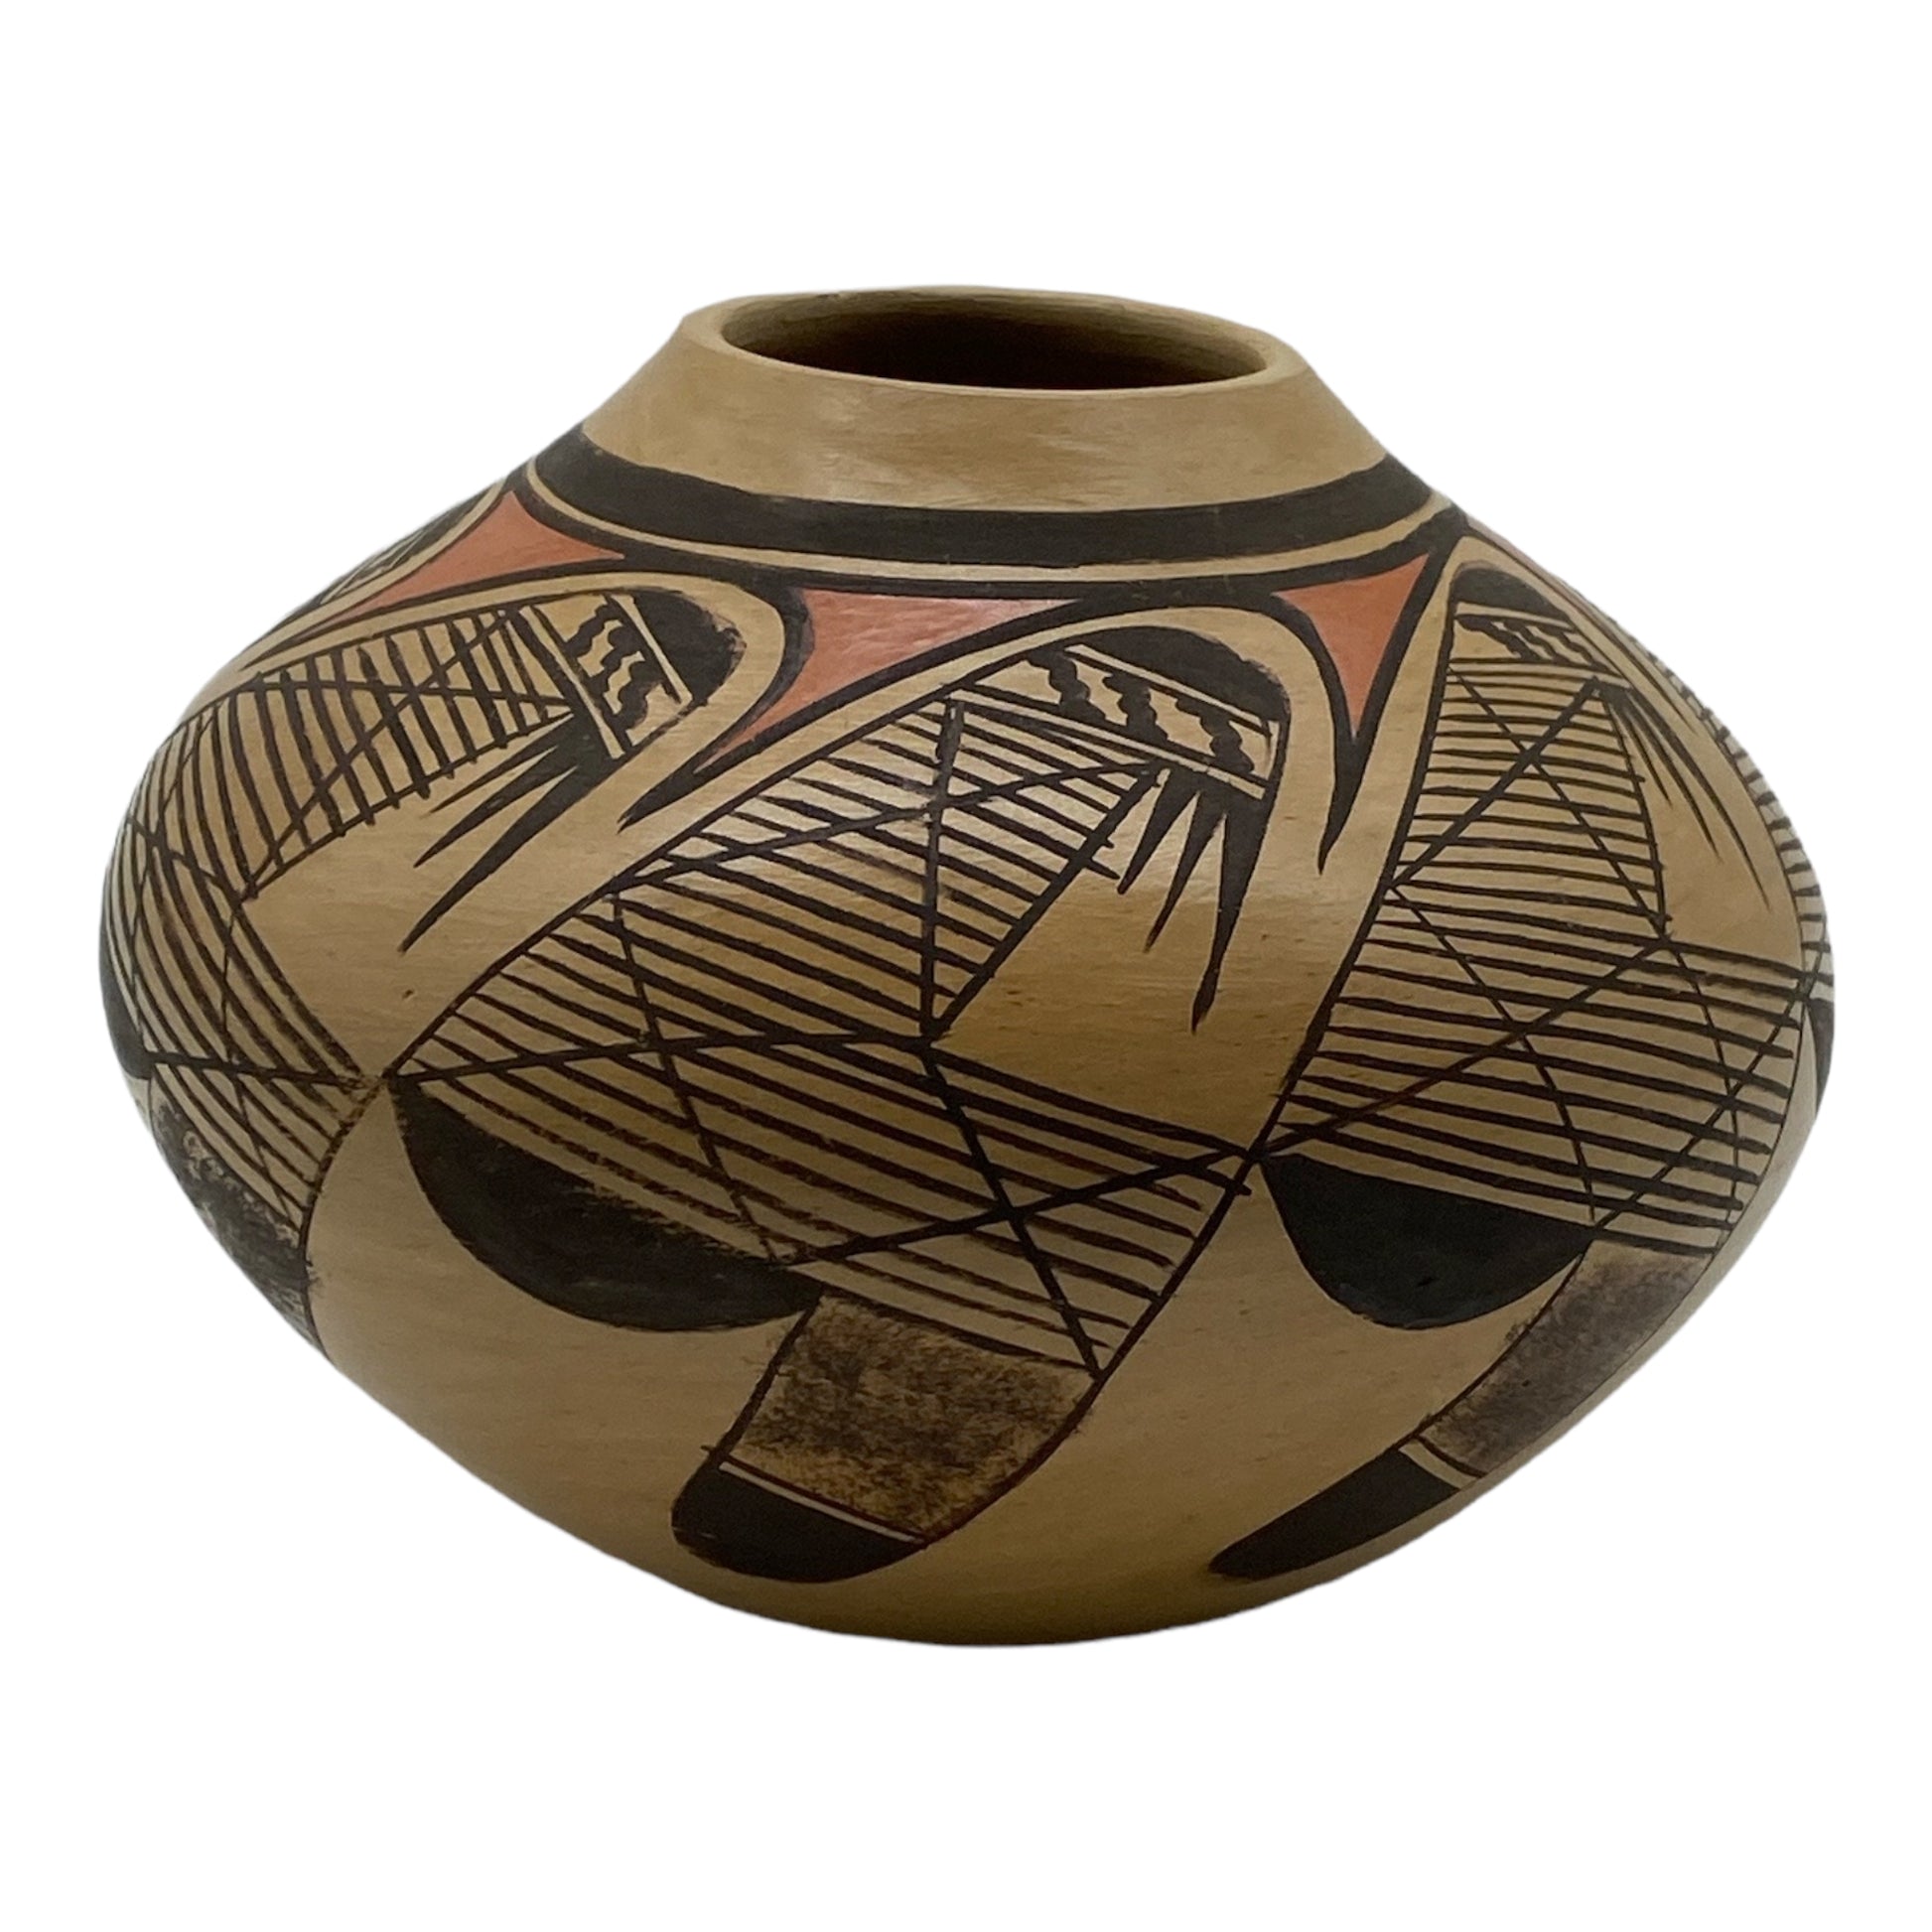 hopi pottery for sale telluride, native american pottery for sale 